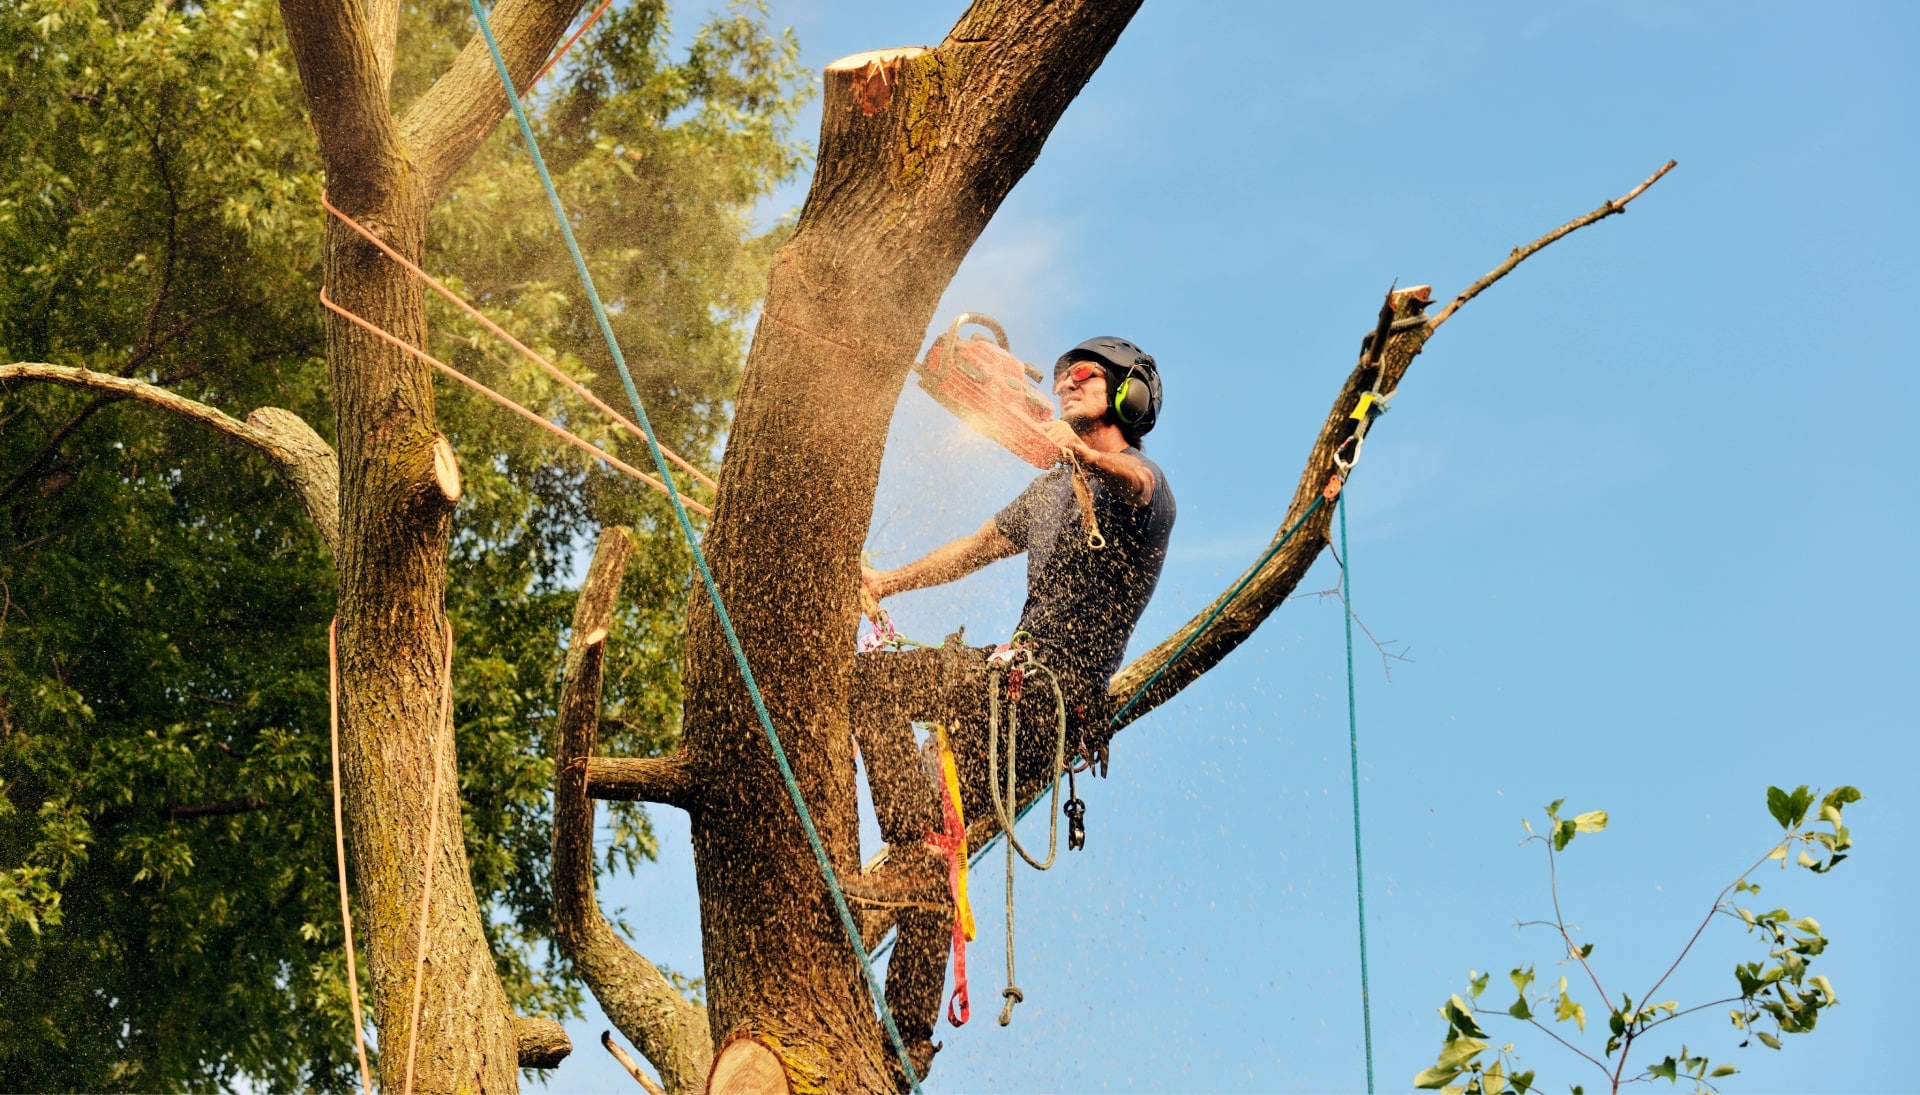 Spring tree removal experts solve tree issues.